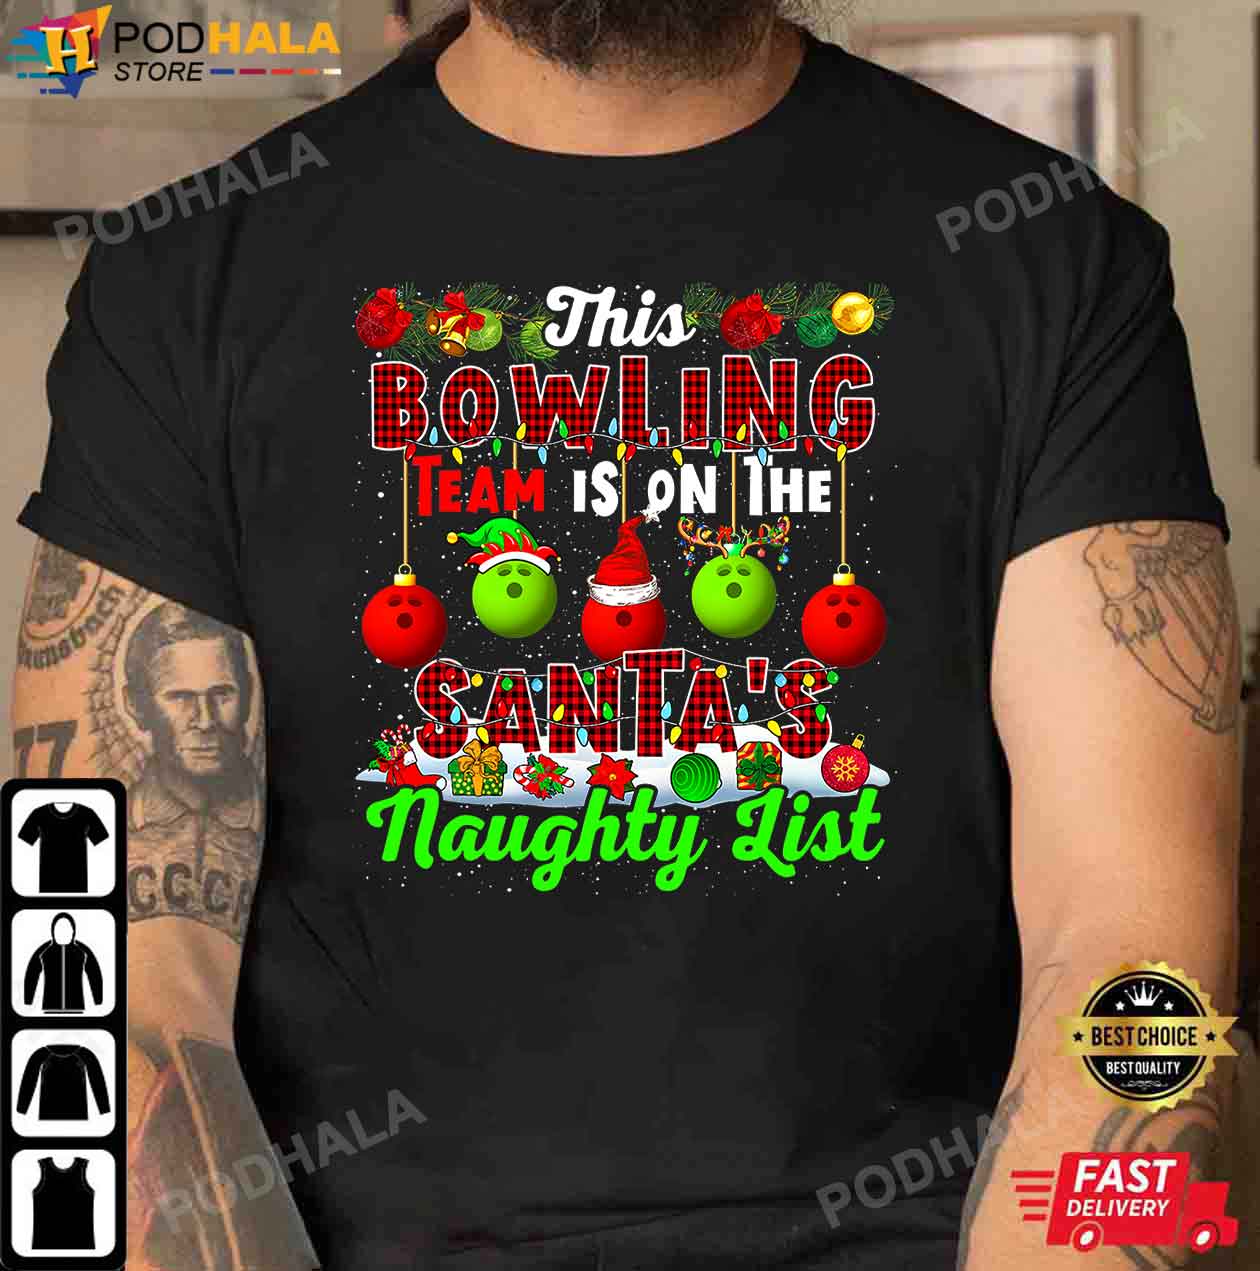 Roadkill T-shirts I Hate Both Teams Football Sports Funny Hilarious Graphic Tees for Christmas Anniversary Birthday Gift Premium T Shirt Adult Humor